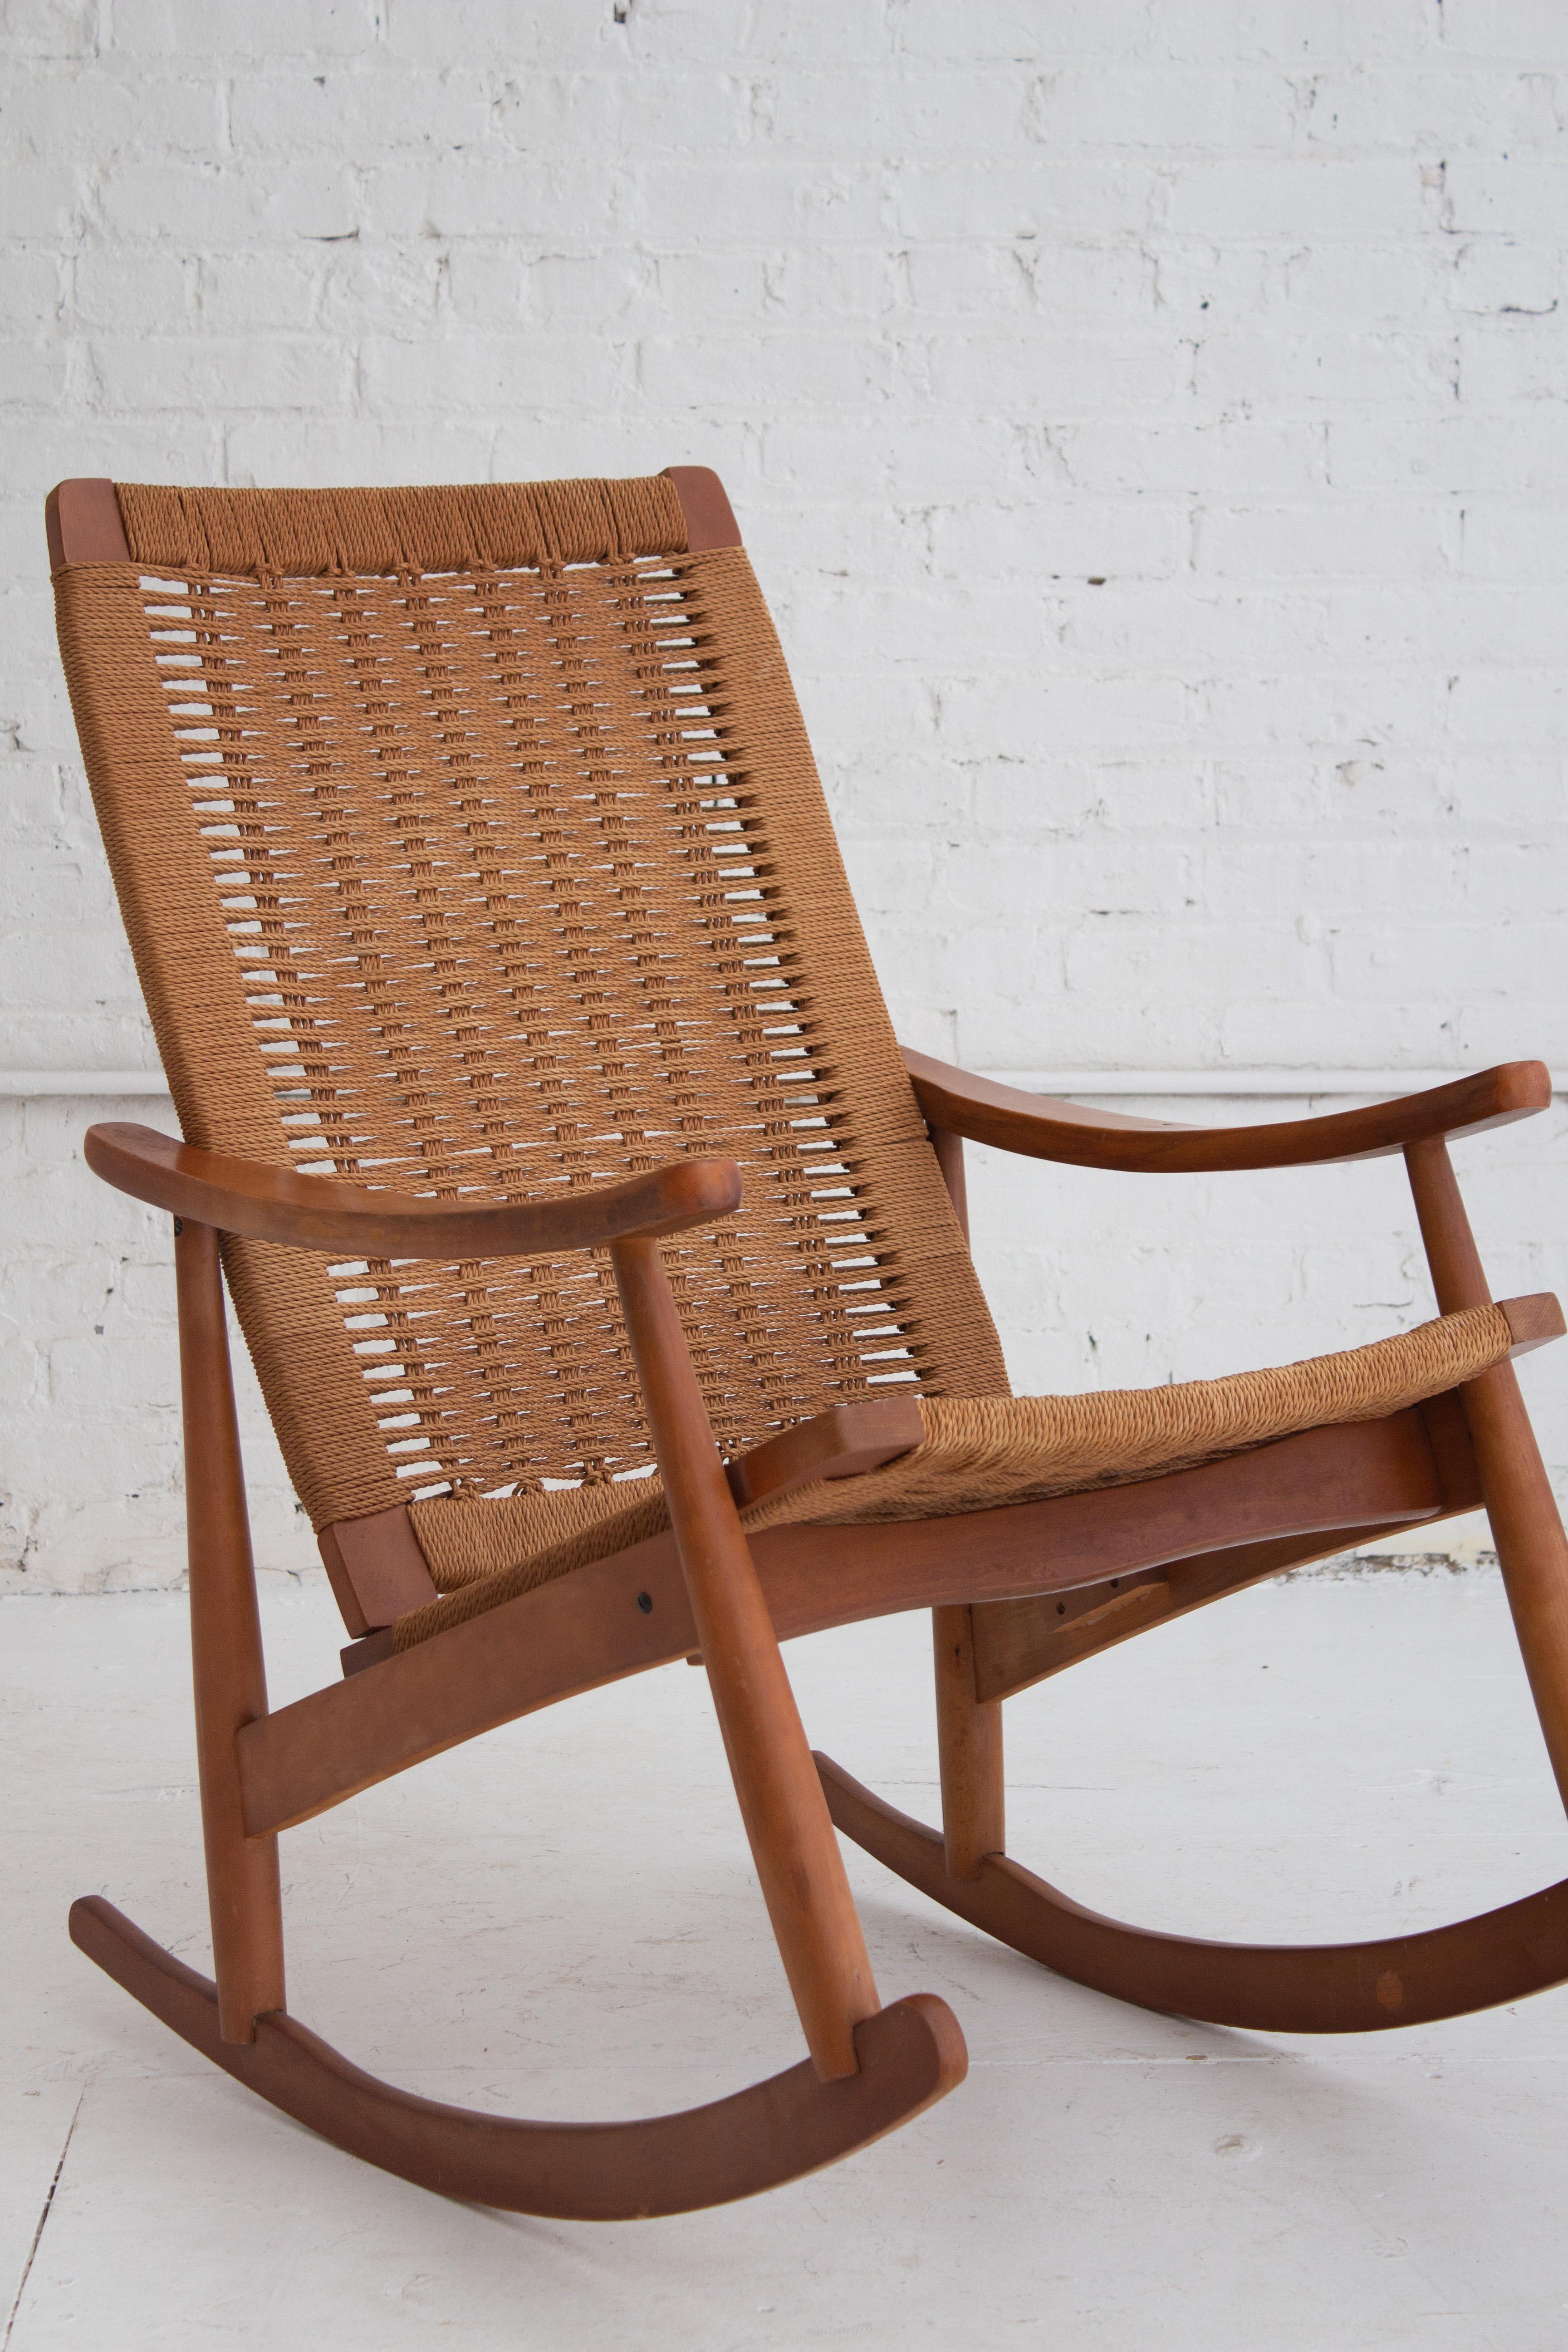 A midcentury woven rope rocker in the style of Hans Wegner. Twisted rope cord is woven over a wood frame. Marked “Made in Yugoslavia.”